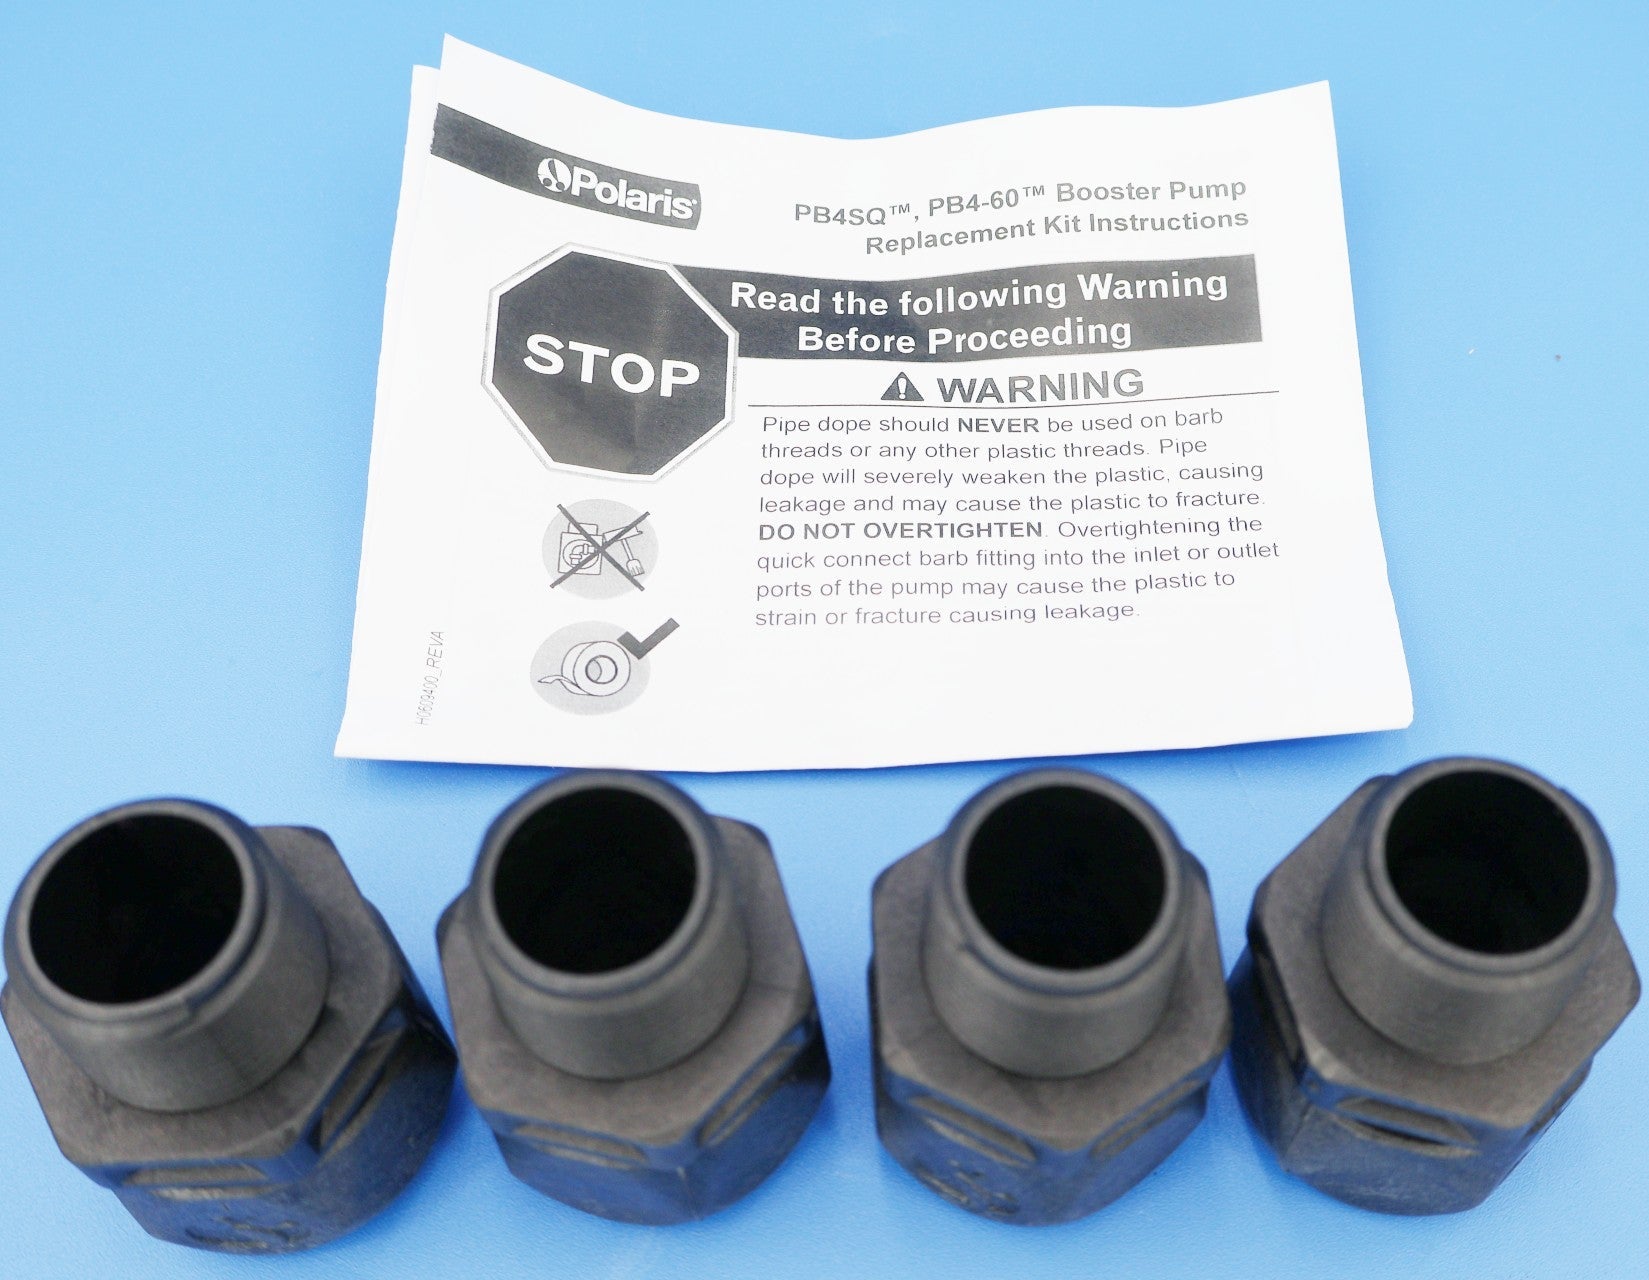 Jandy (Polaris) Booster Pump Black Quick Connect Fittings 4-Pack R0621000 - Pool Pump Parts - img-1